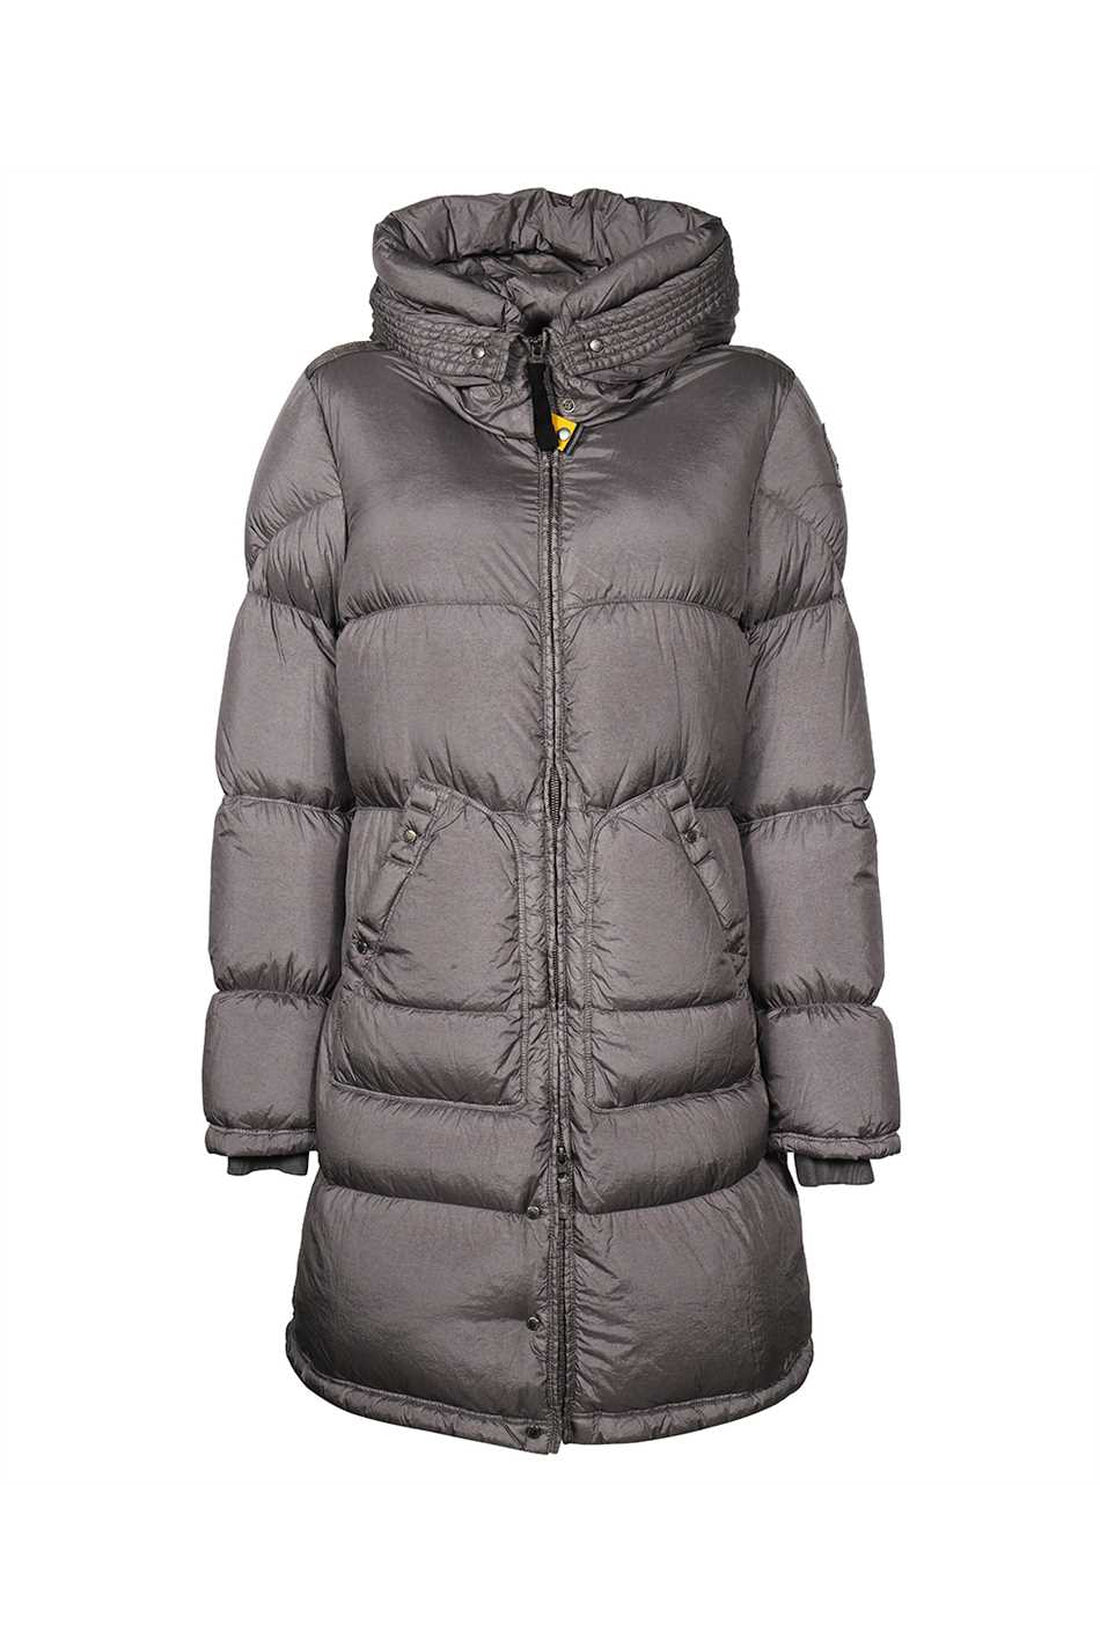 Parajumpers-OUTLET-SALE-Angelica long hooded down jacket-ARCHIVIST